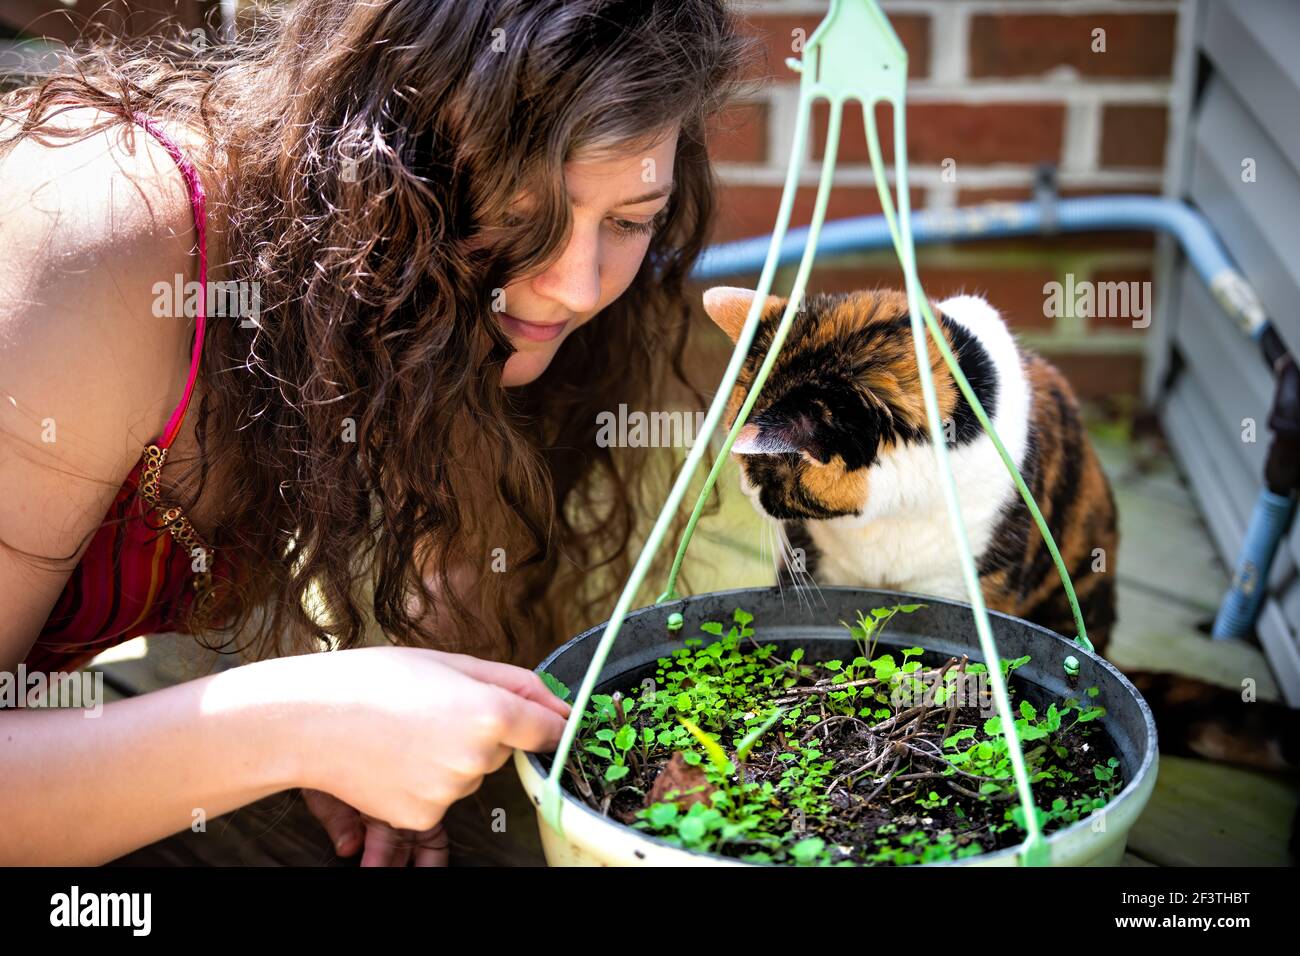 Closeup of one young woman owner rubbing catnip leaves and calico cat sniffing smelling small green potted plant in flower pot in outdoor home garden Stock Photo